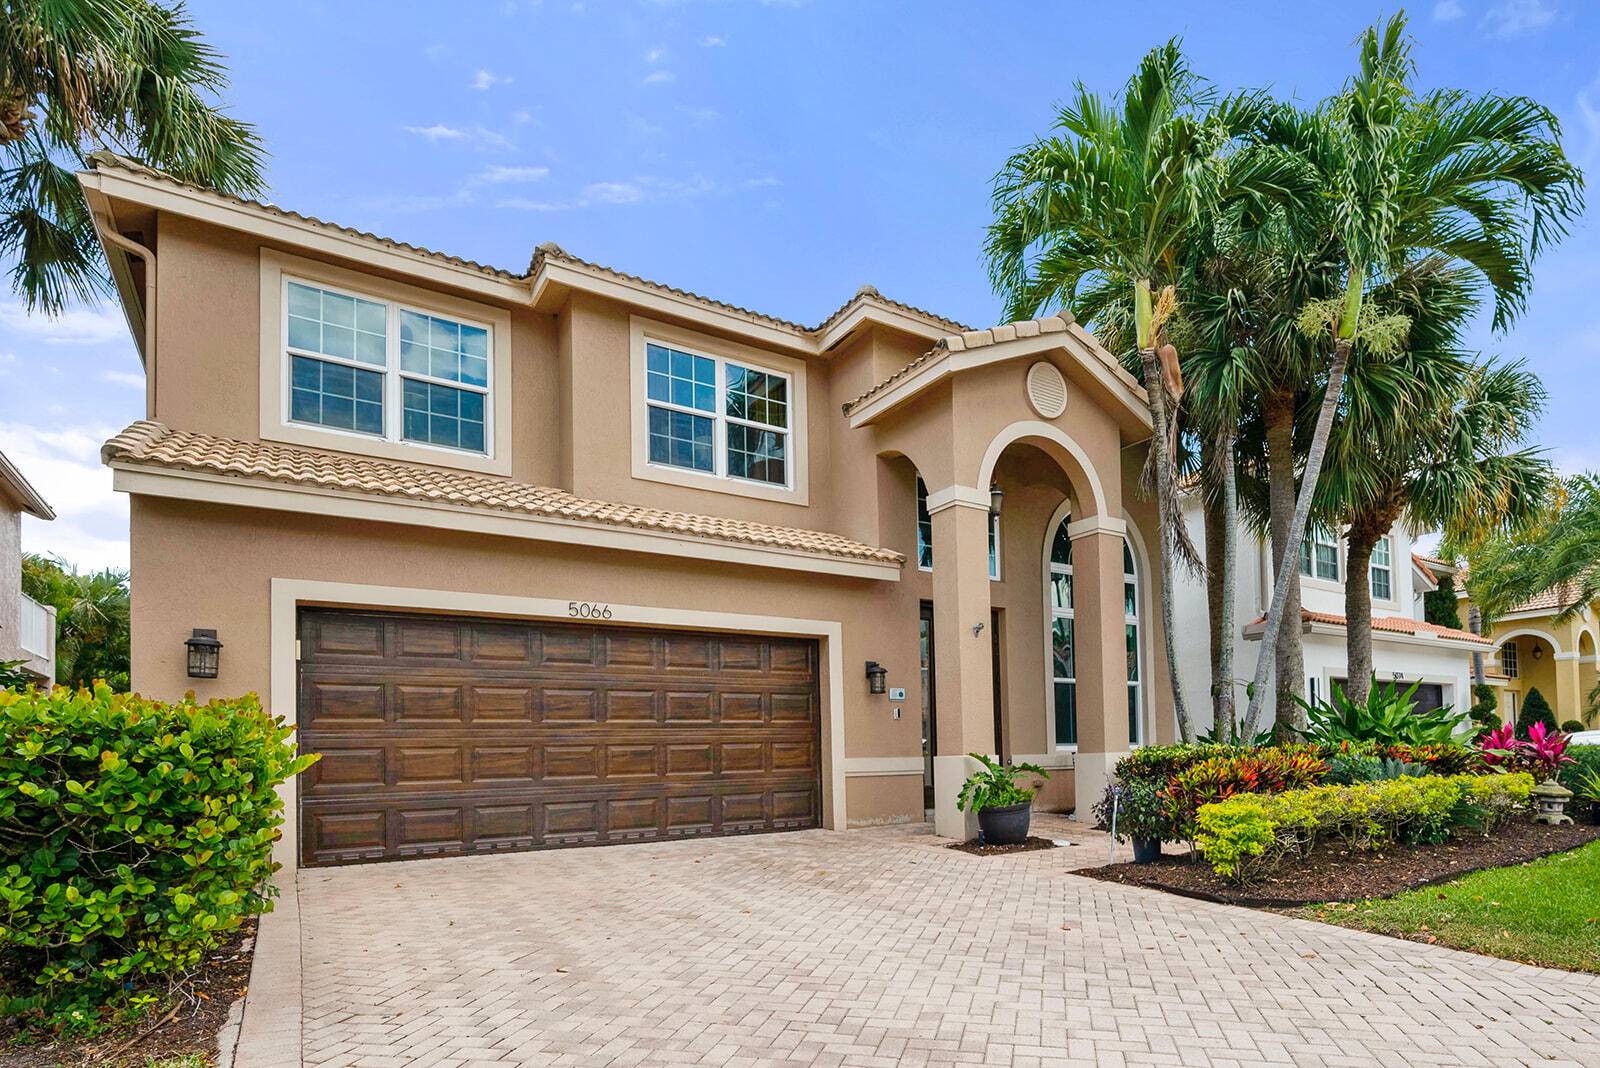 Nestled within the tranquil confines of the esteemed Colony Preserve gated community, this exquisite single family home stands as a beacon of luxury and comfort.